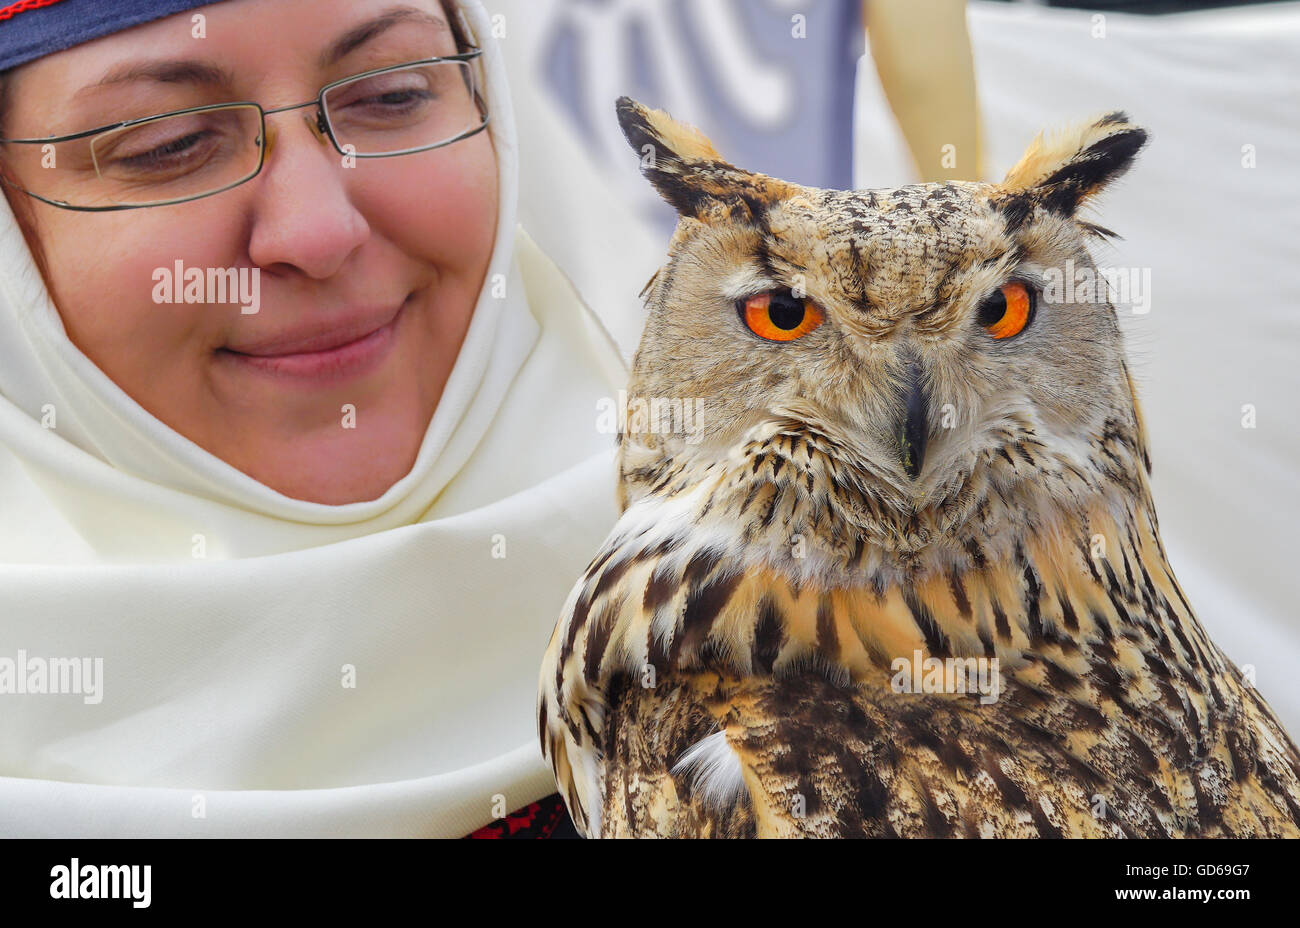 Portrait of a Woman with eagle owl Stock Photo